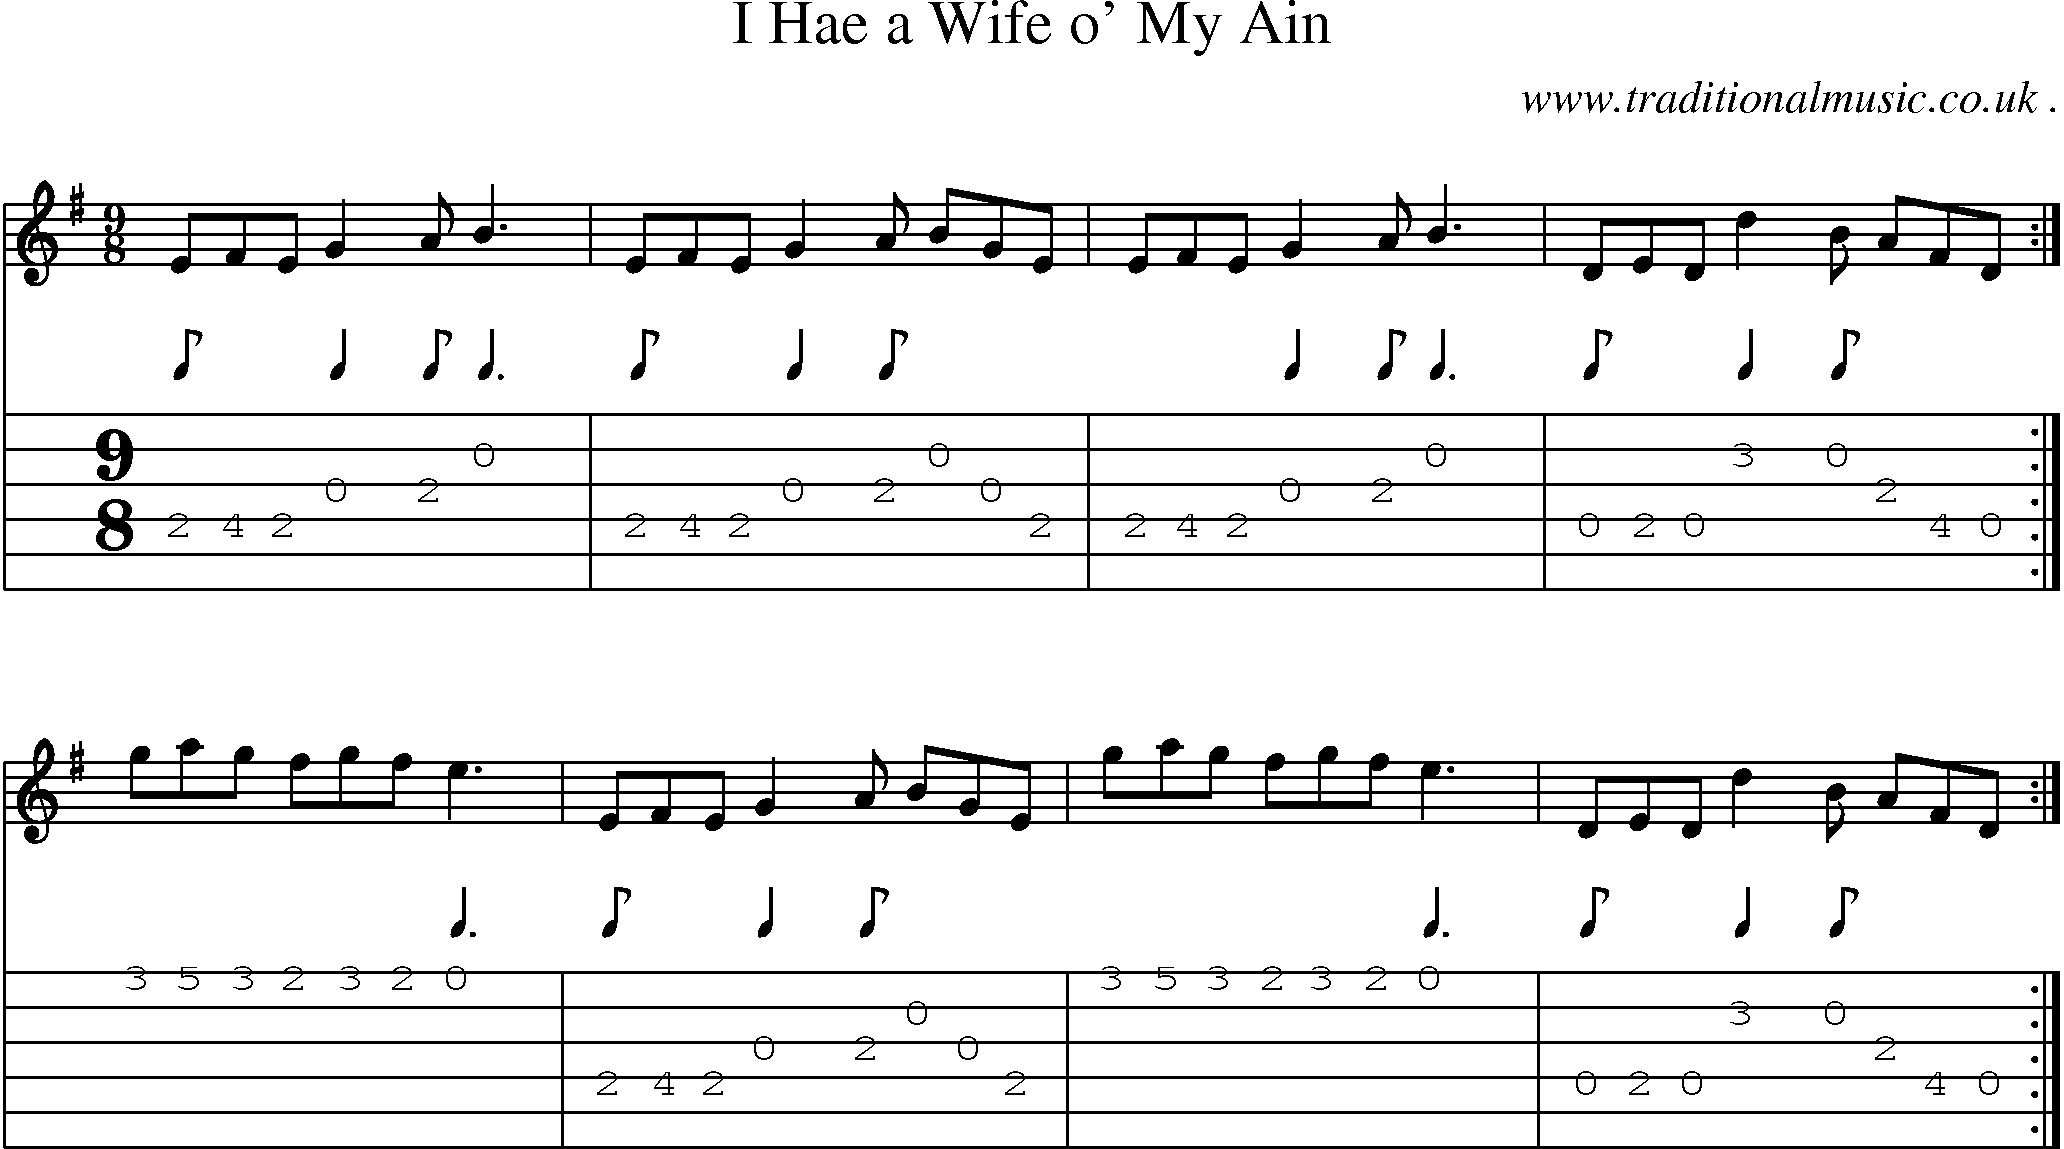 Sheet-music  score, Chords and Guitar Tabs for I Hae A Wife O My Ain